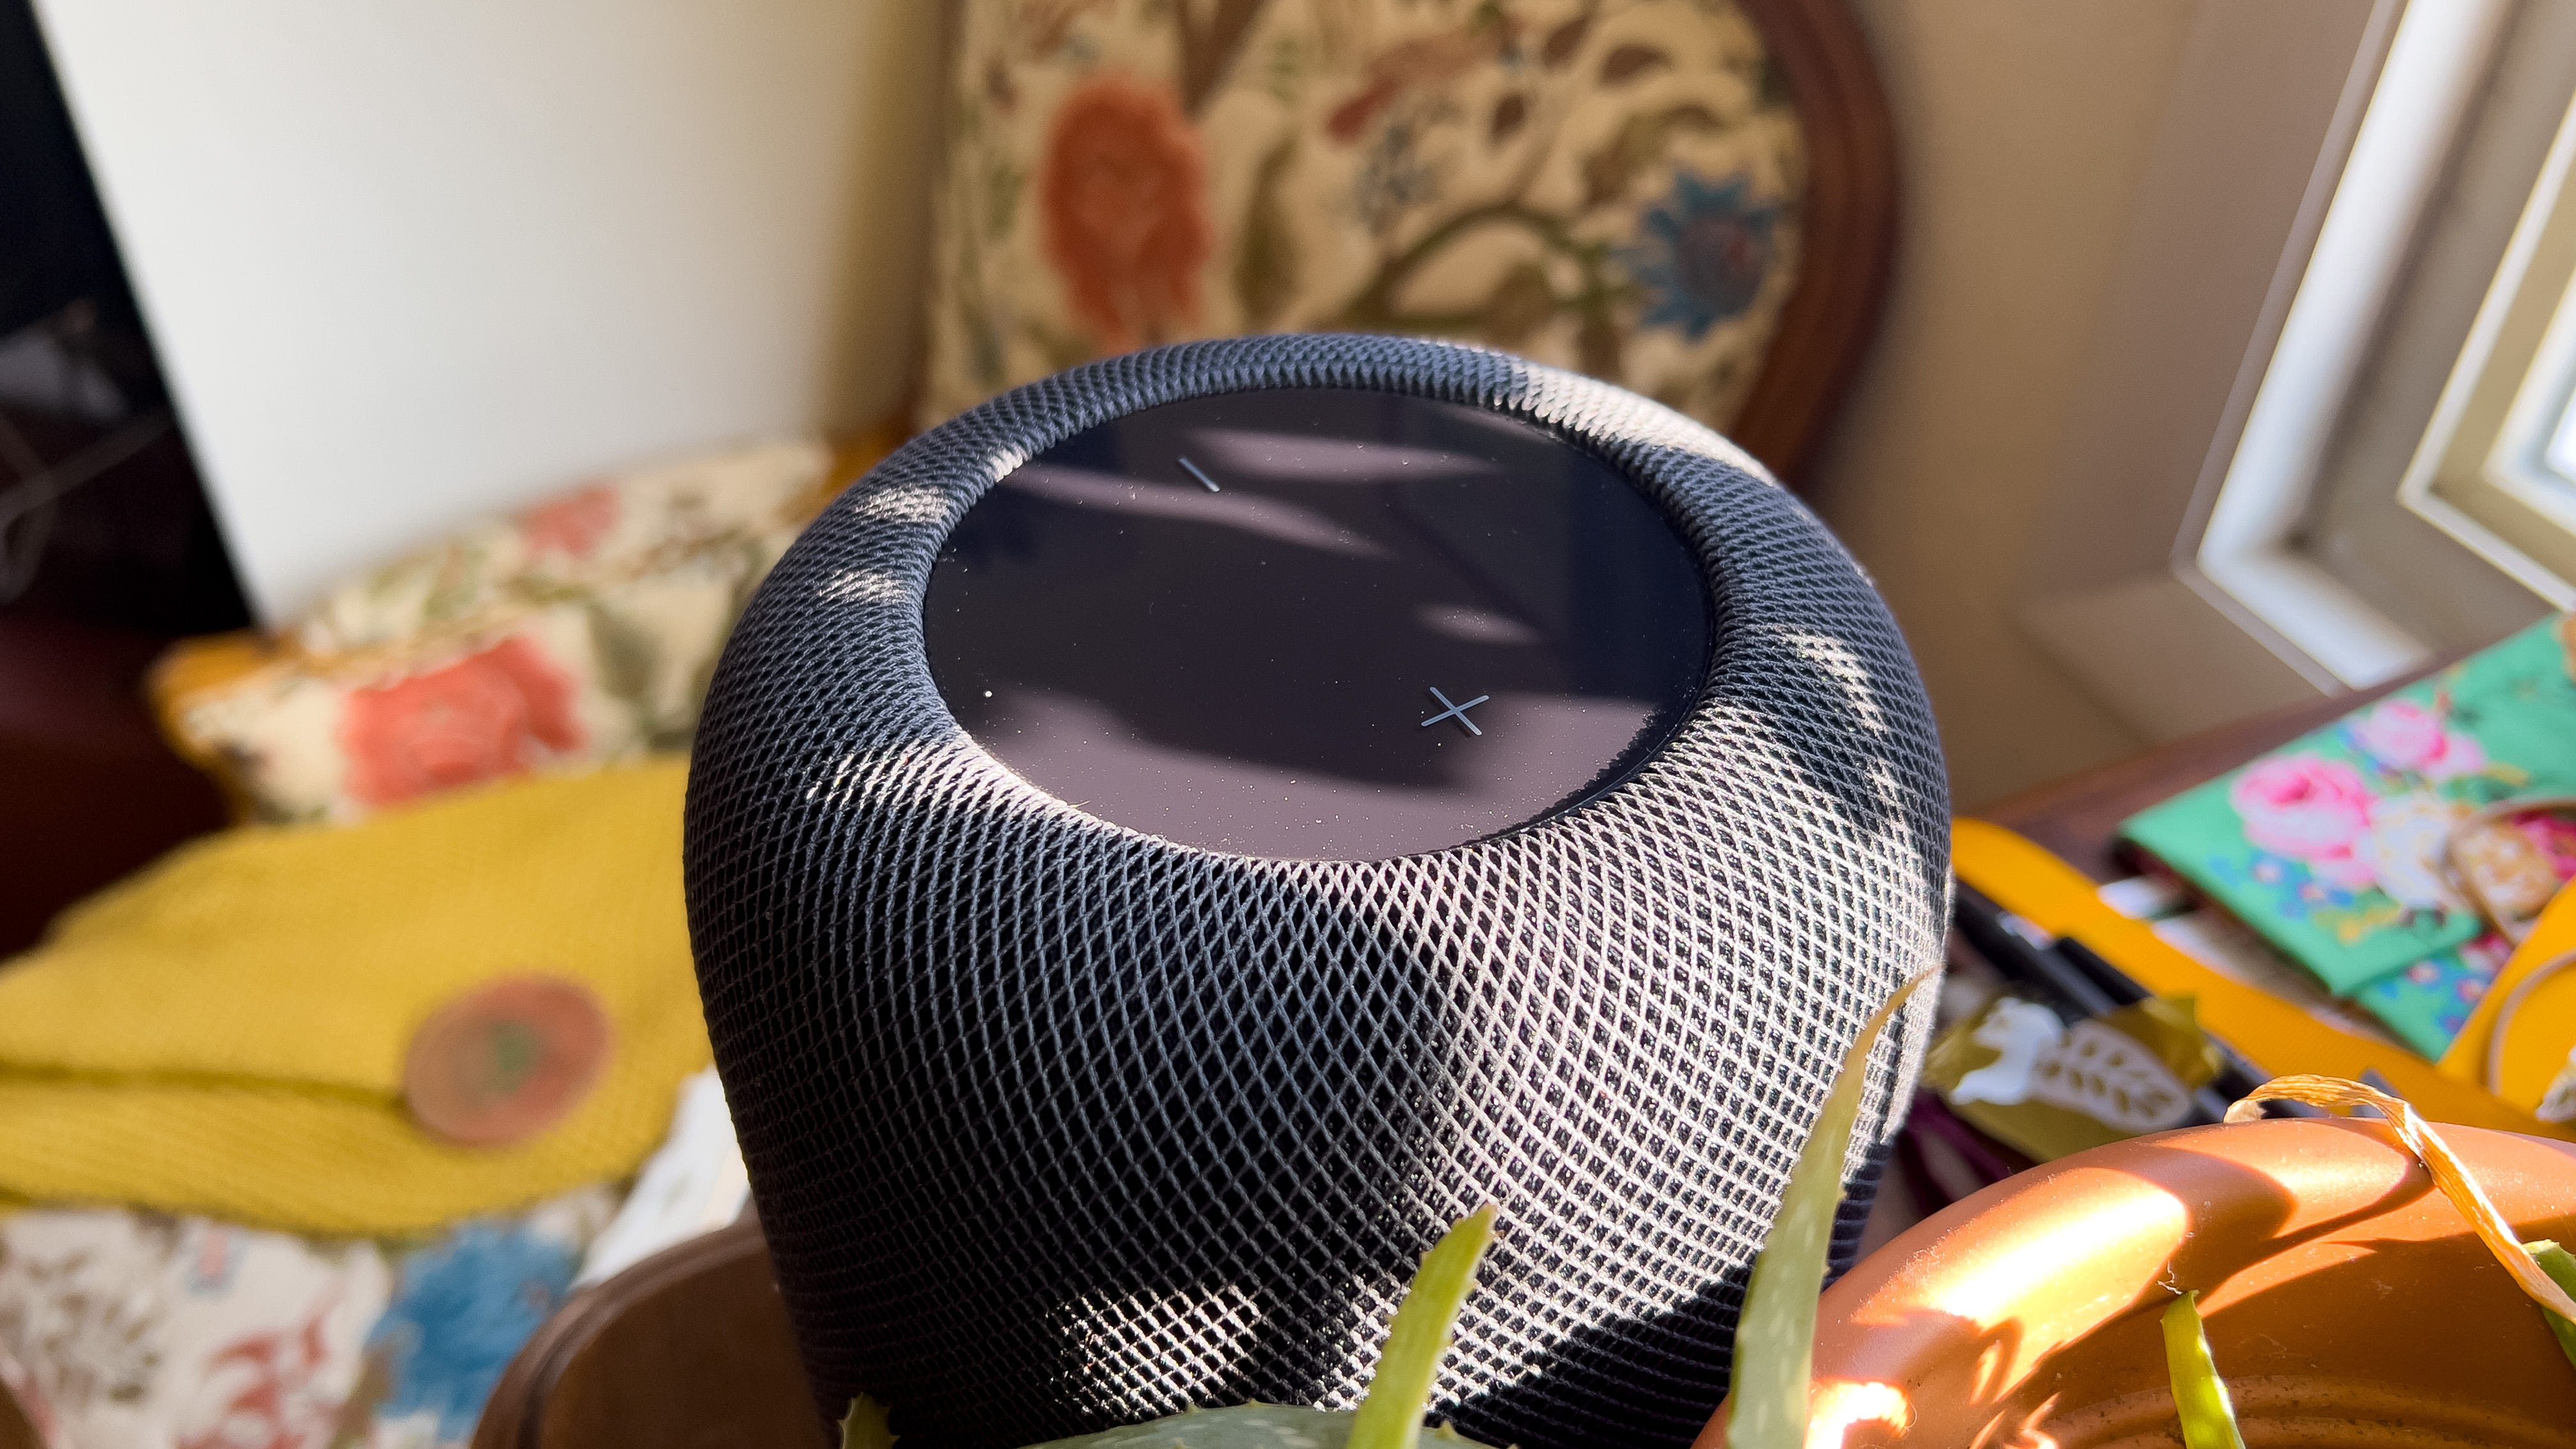 Apple HomePod 2 review: A stellar but pricey sequel